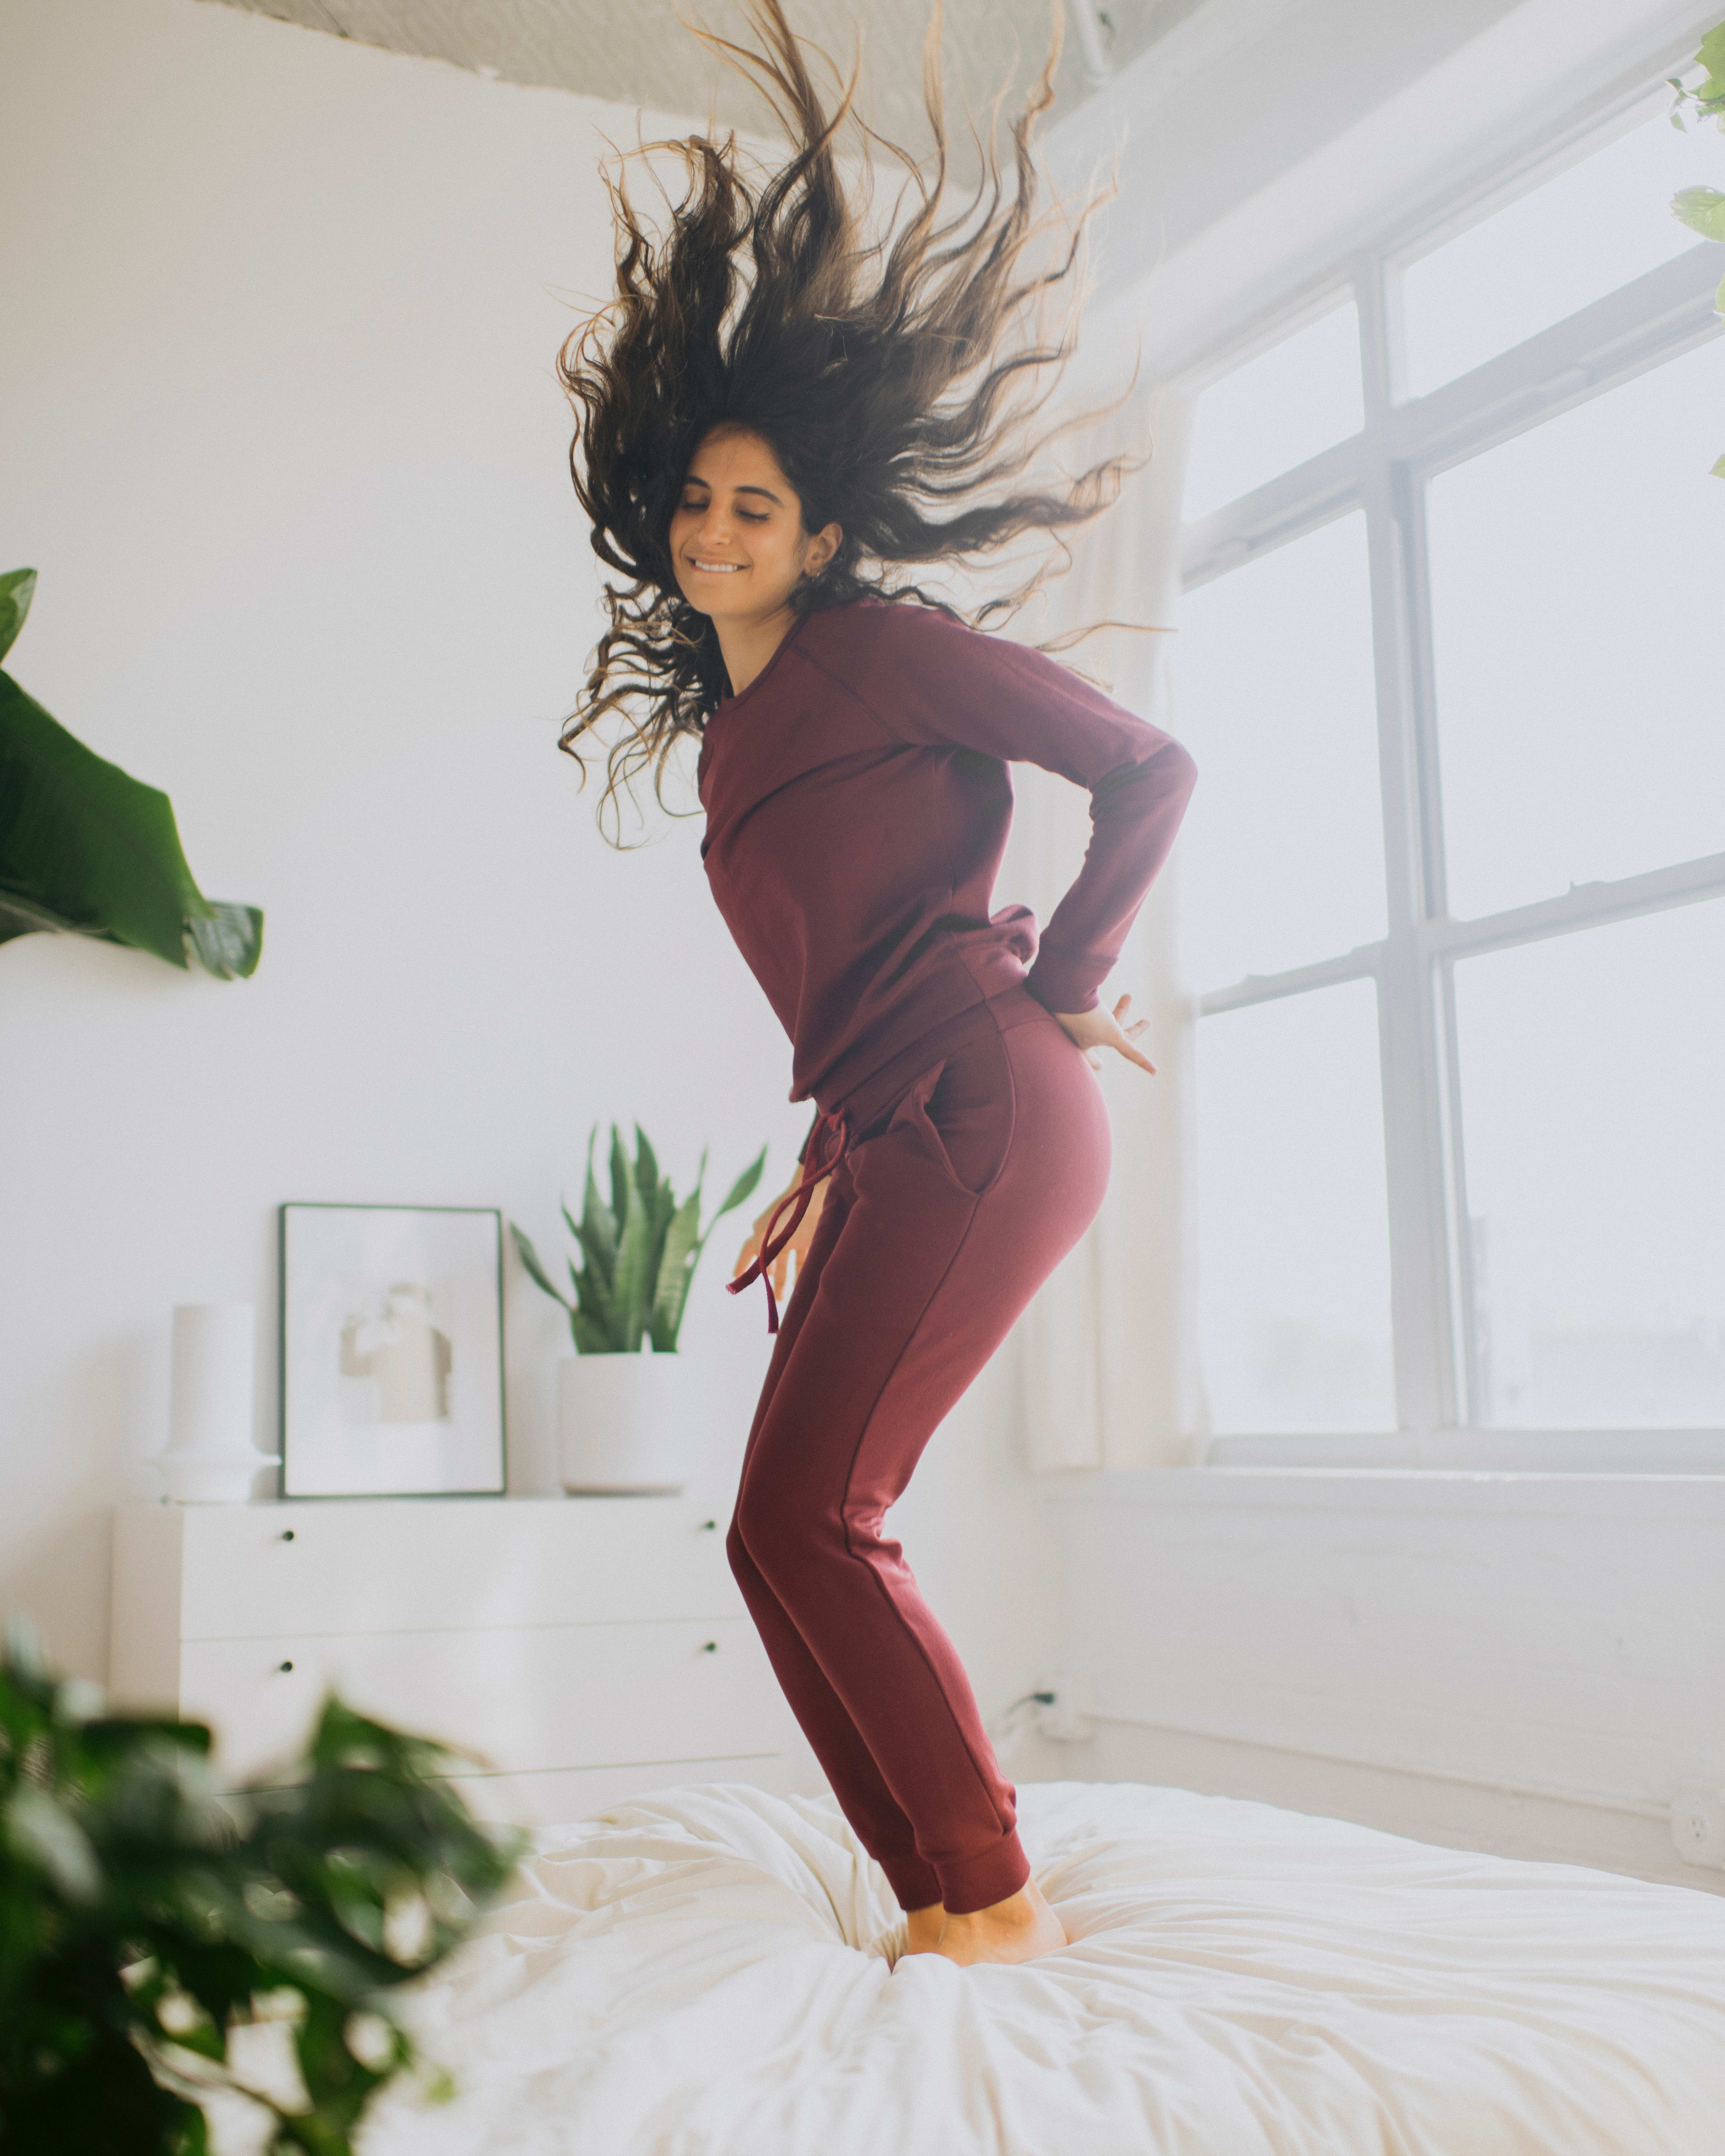 A fashion photo shoot of a woman jumping on a white bed with her hair in the air.